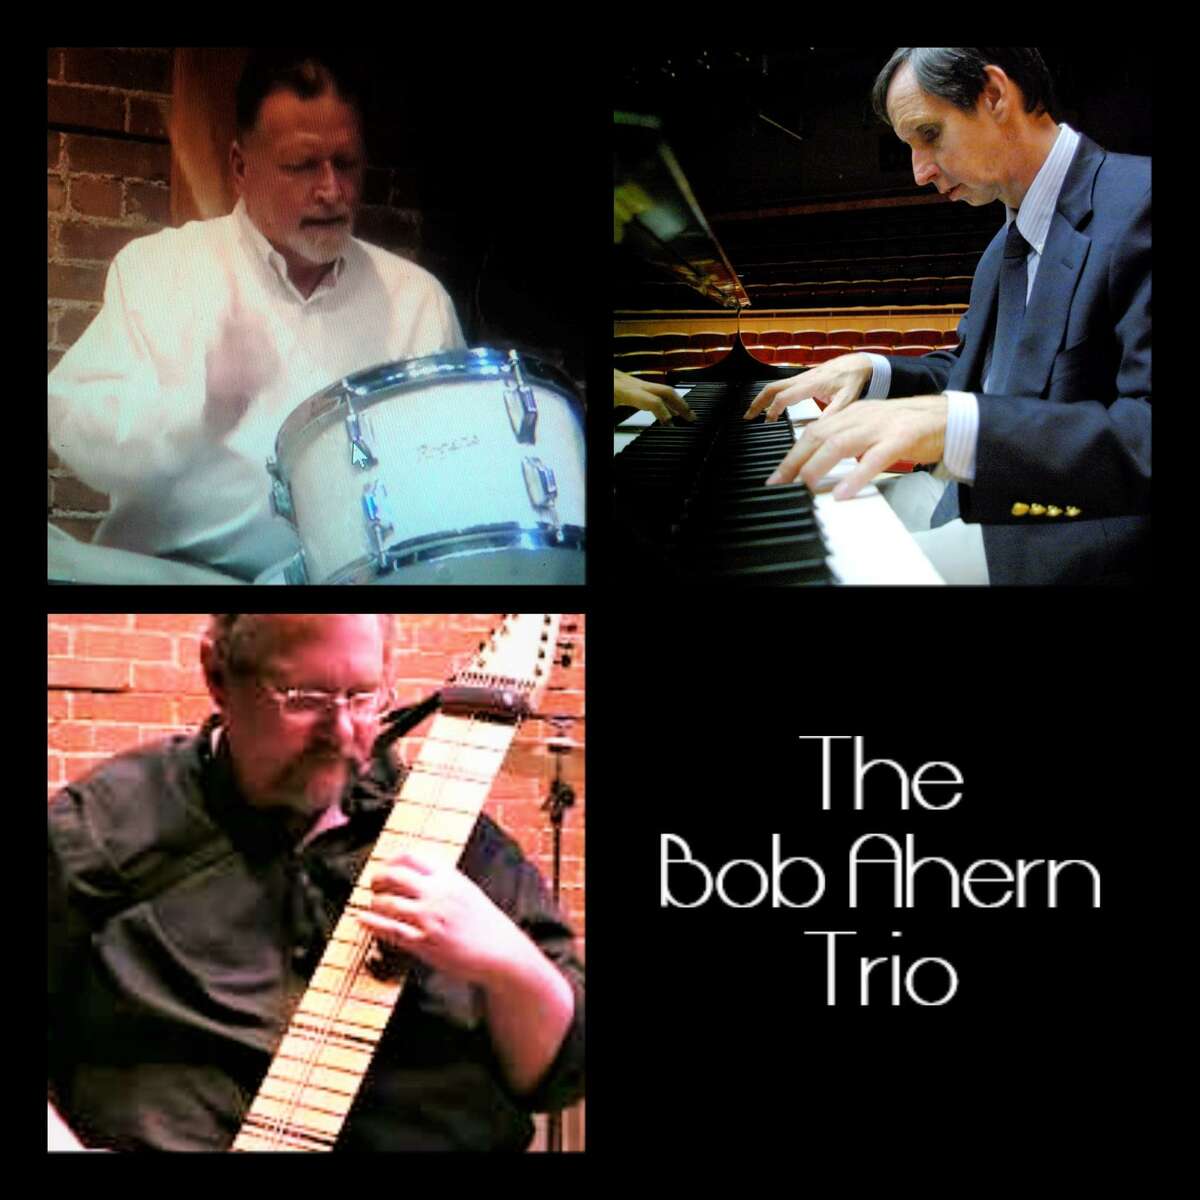 The Bob Ahern Trio includes musicians Ken Fischer, a jazz music teacher, and Chapman Stick player Brett Bottomley. The group has an upcoming performance at The Buttonwood Tree in Middletown.